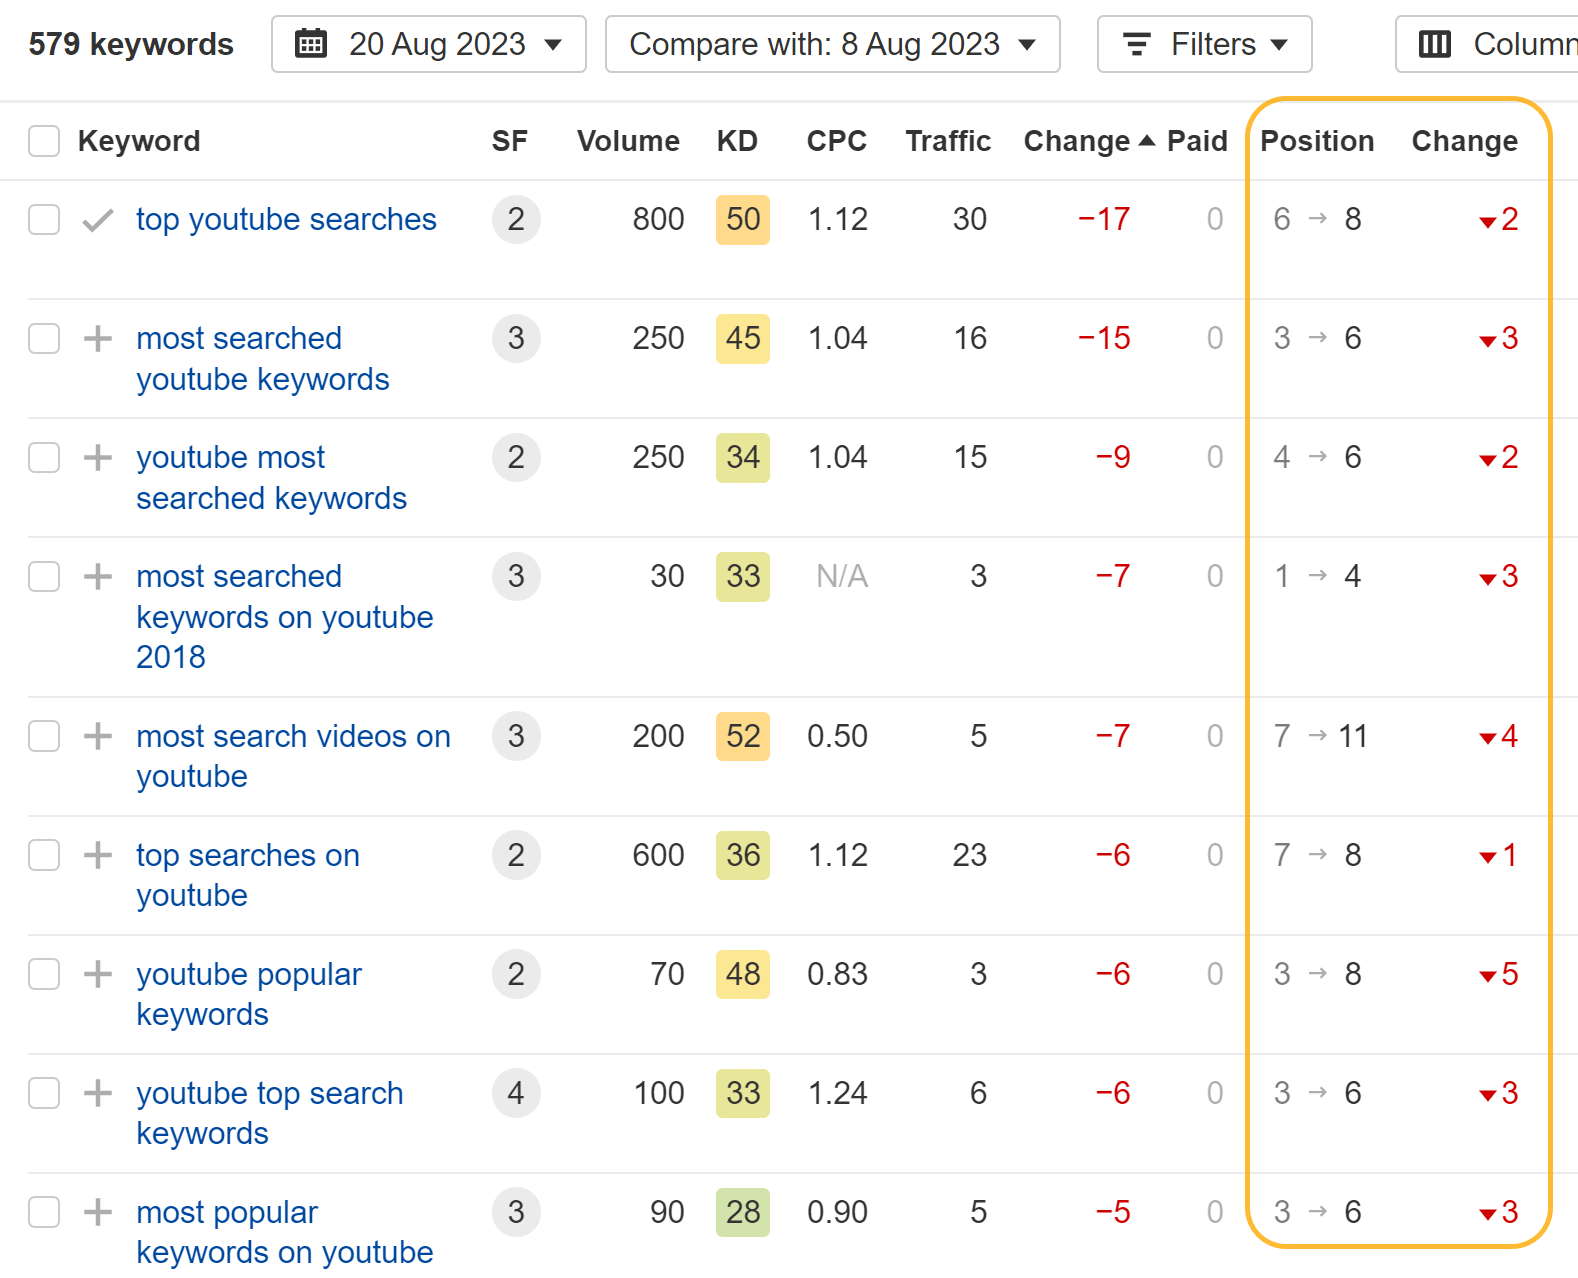 Impact on rankings on our "top YouTube searches" page from removing the content. Ahrefs' data